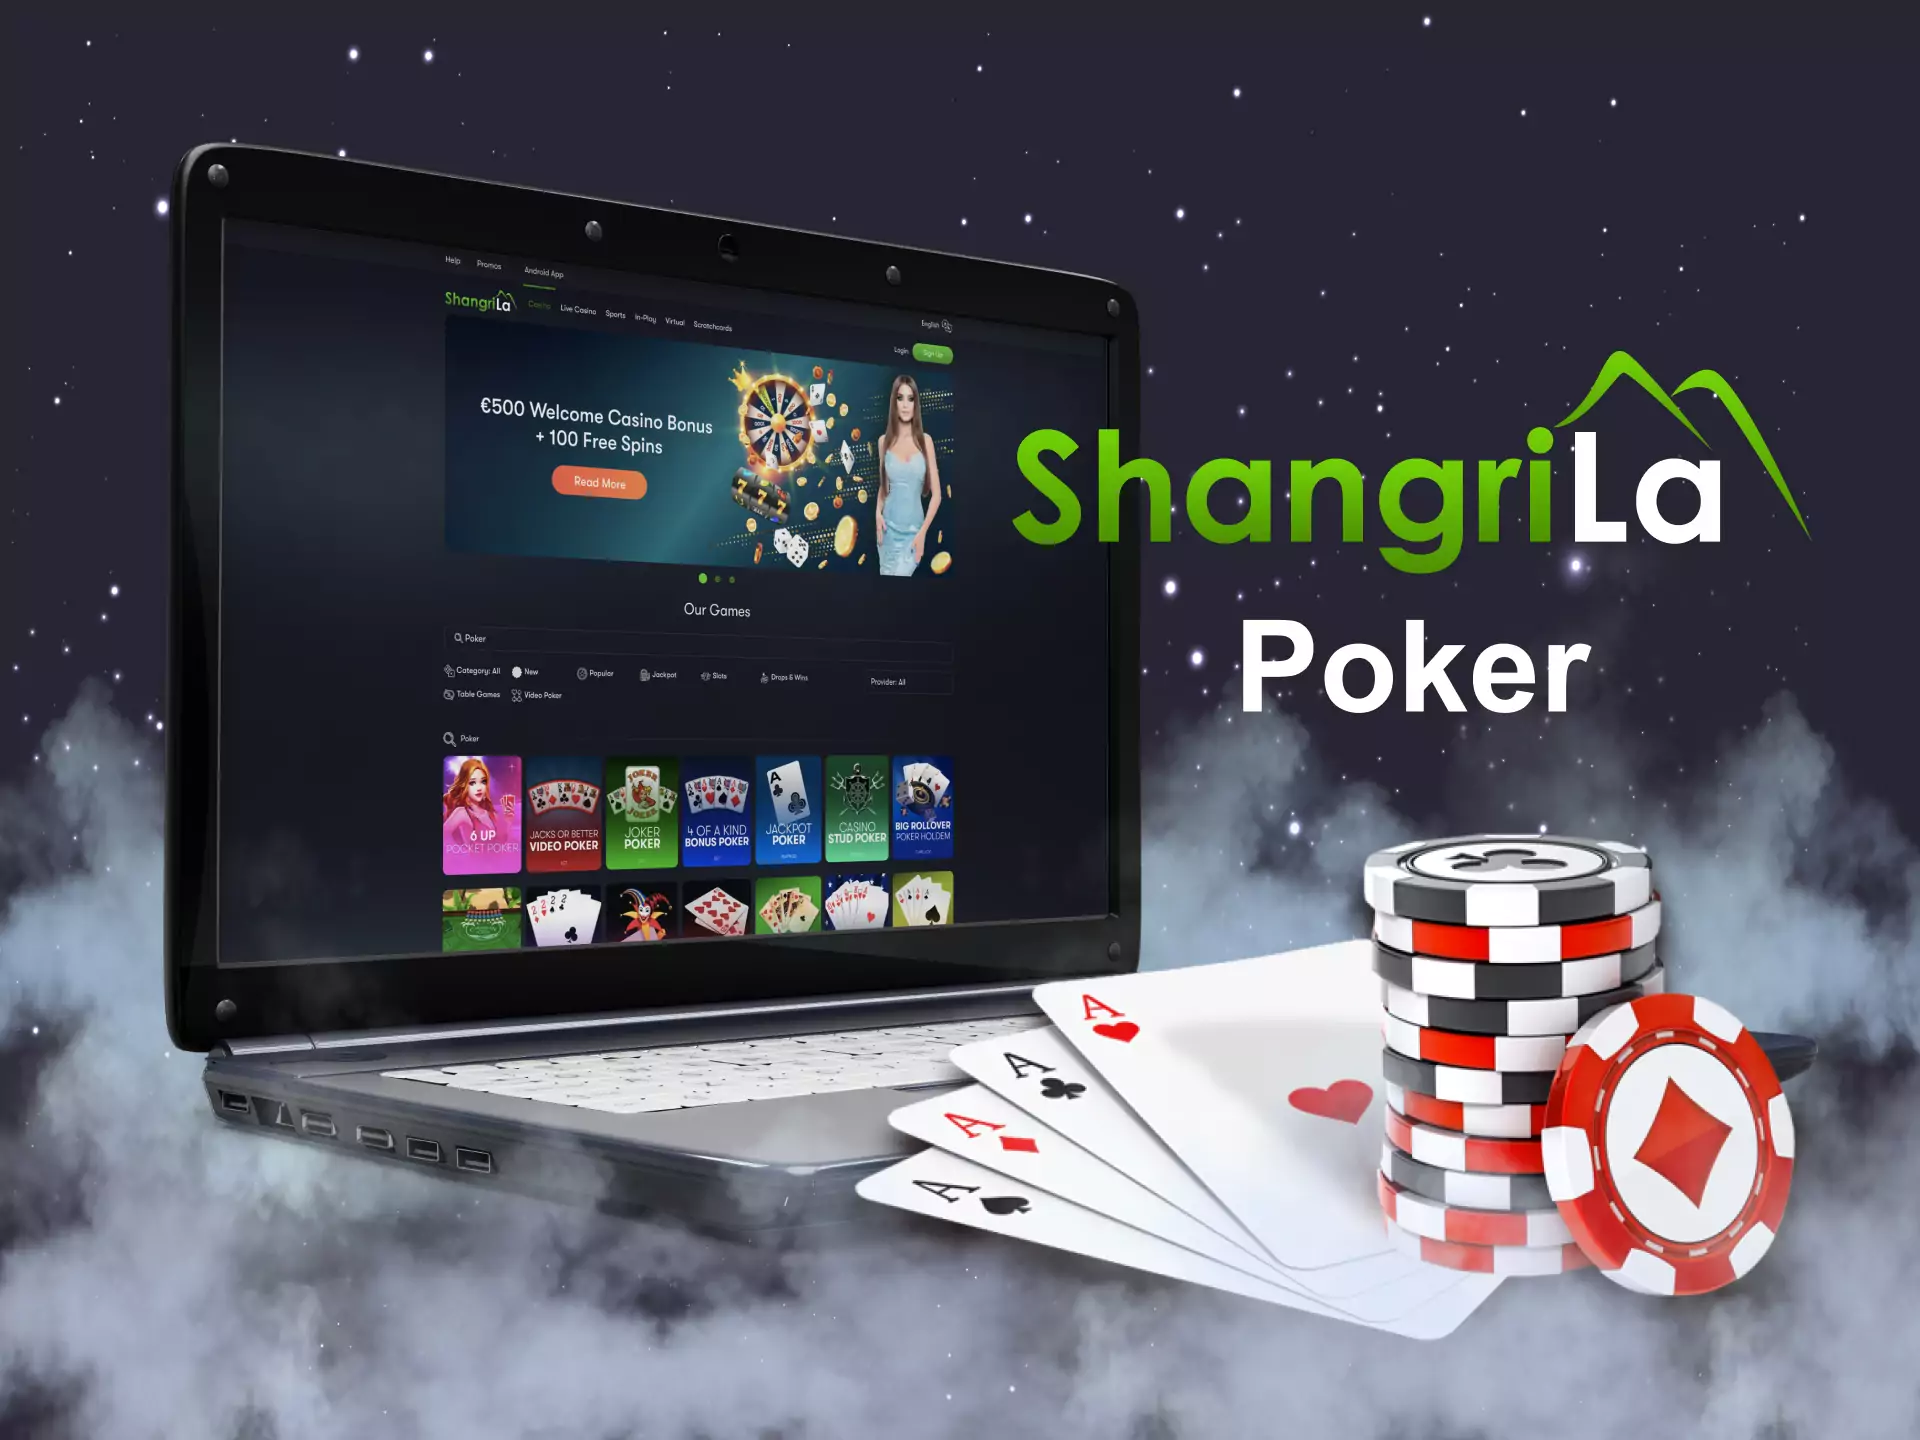 In the Shangri La Casino, poker is one of the most popular table games.